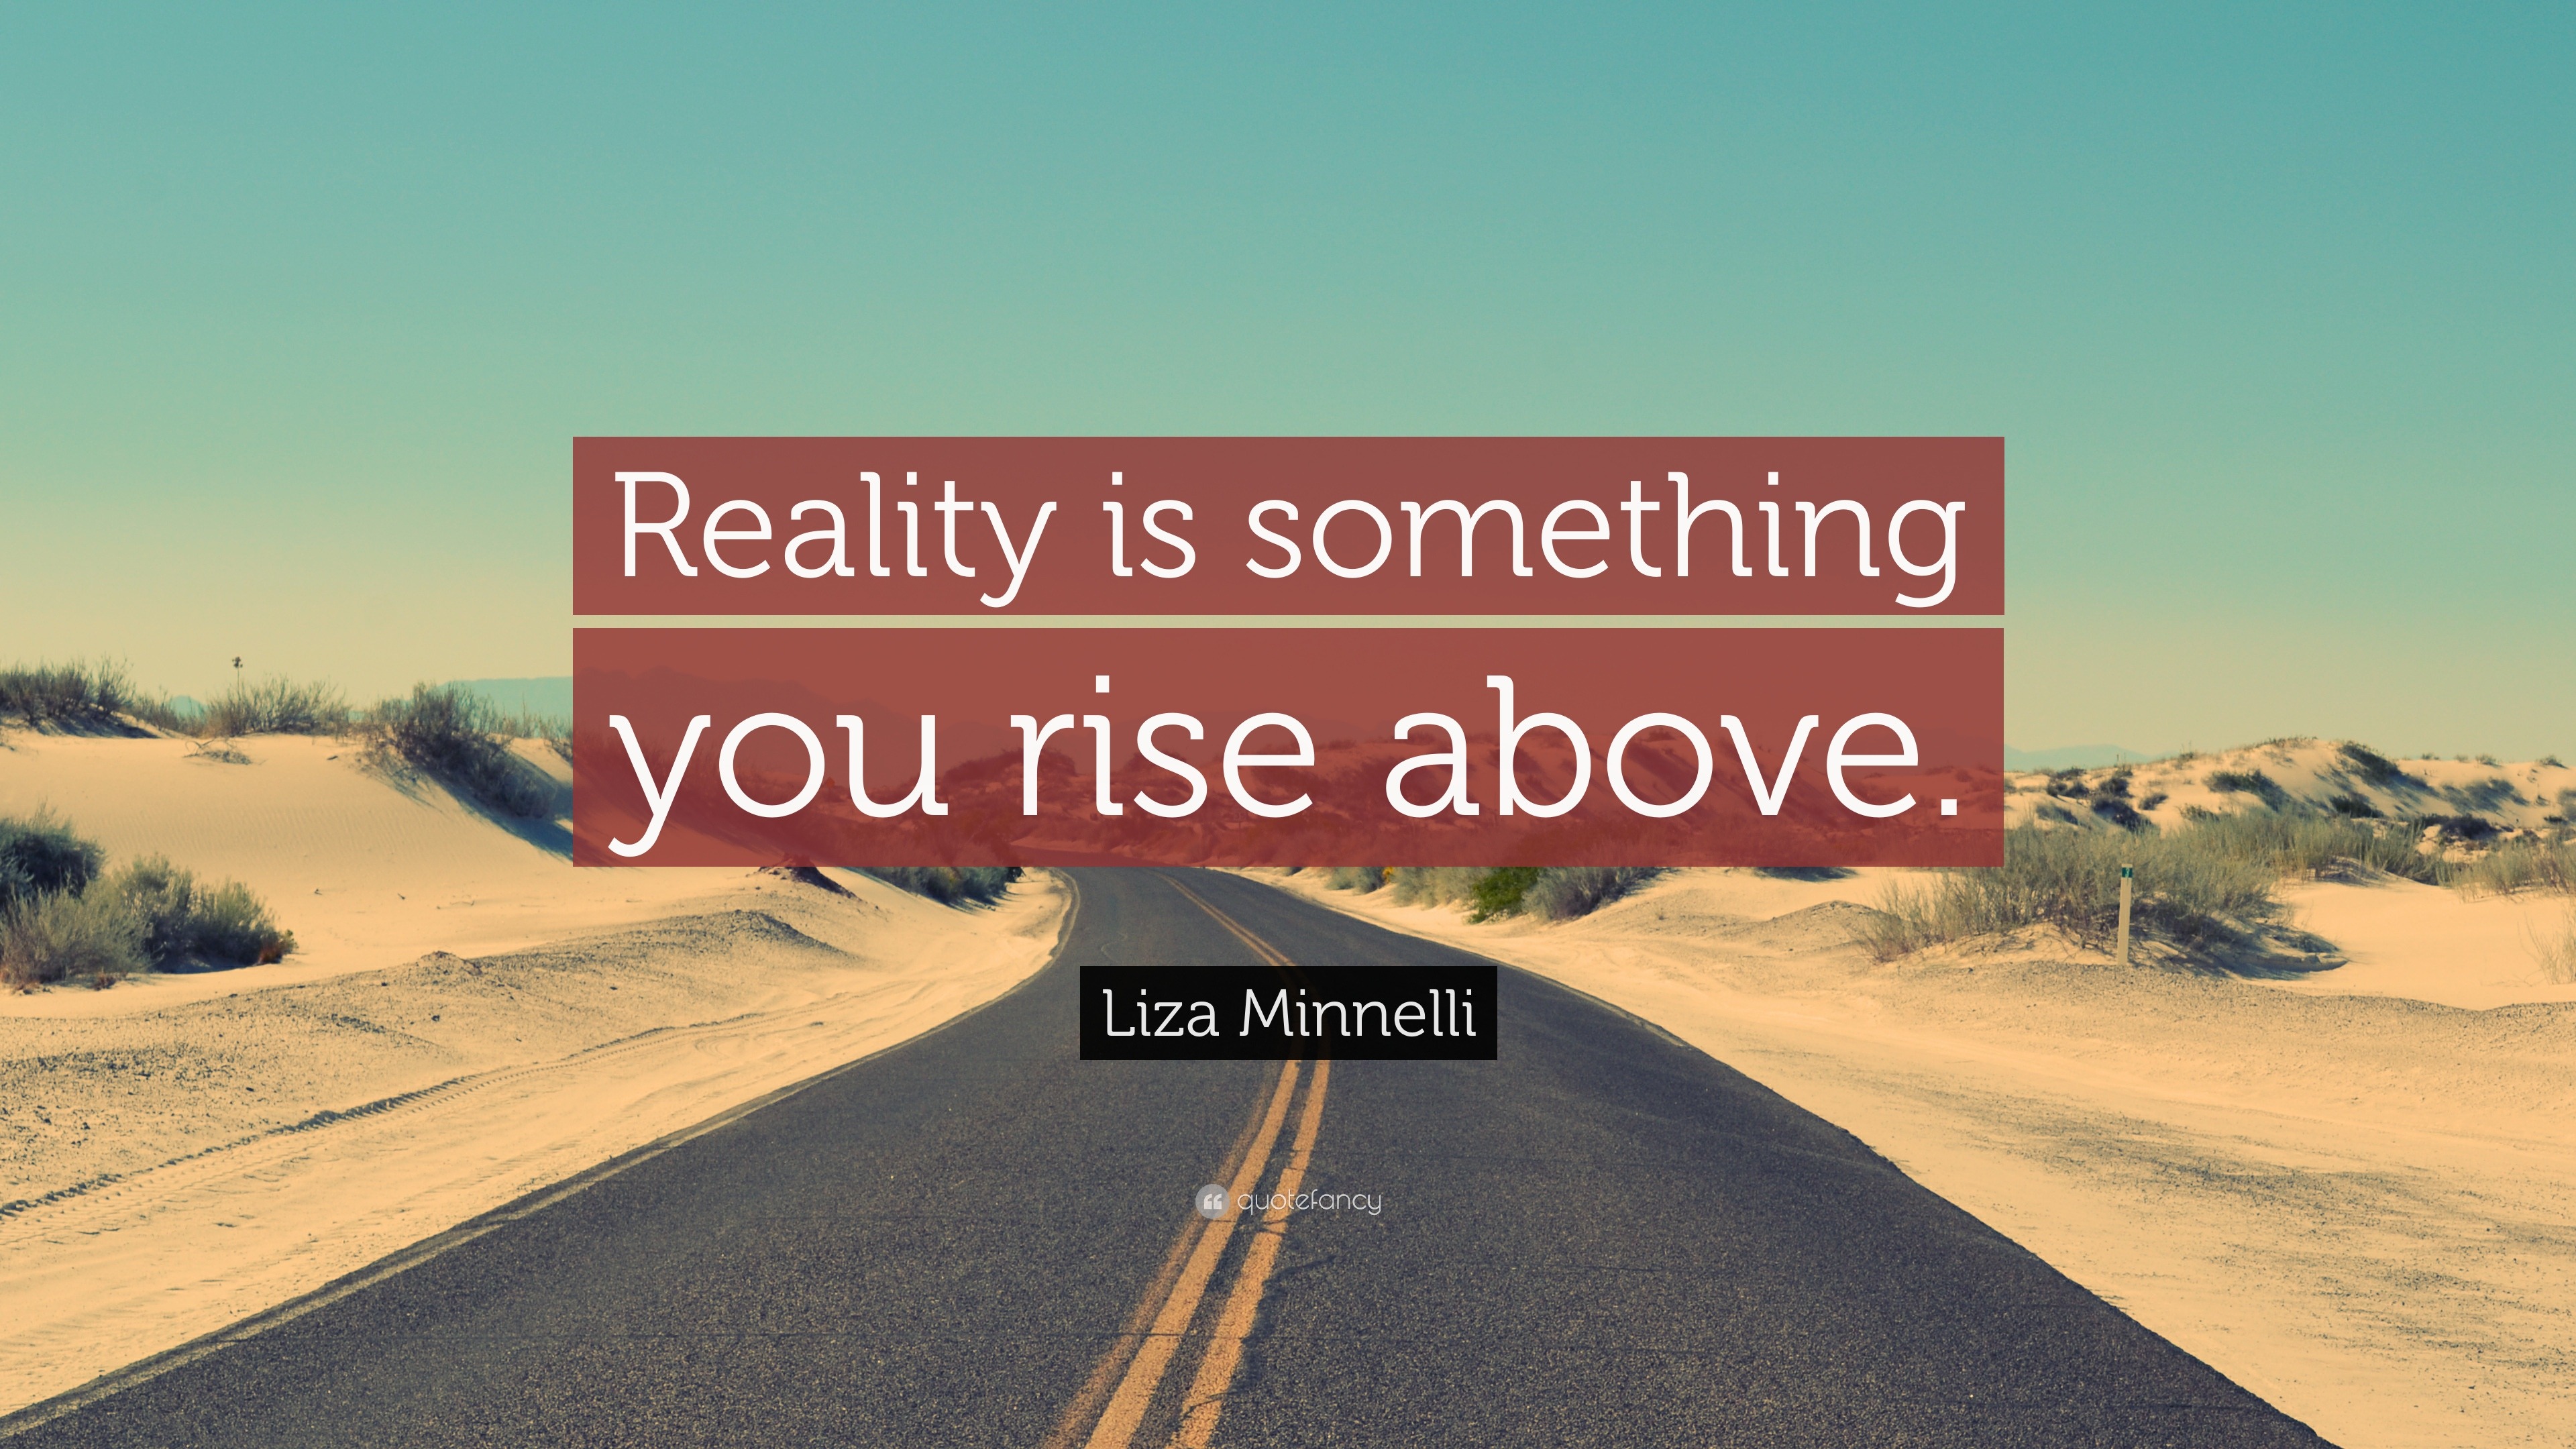 Liza Minnelli Quote: “Reality is something you rise above.”